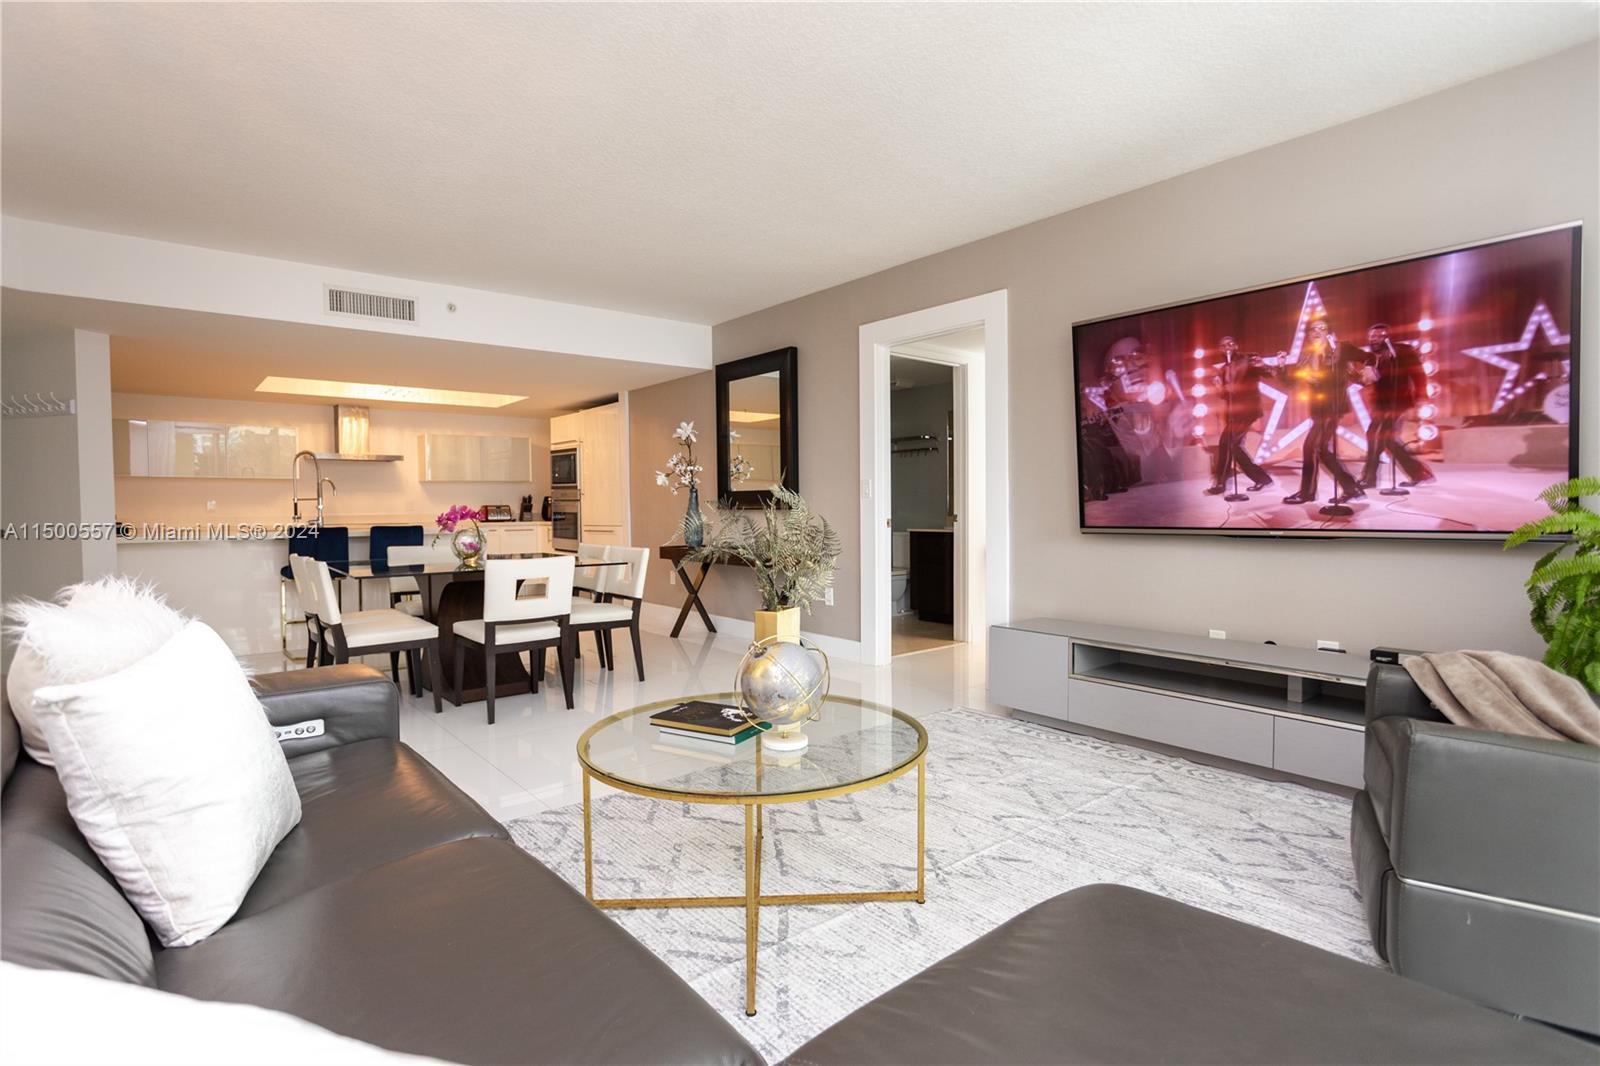 Property for Sale at 200 Sunny Isles Blvd Th-304, Sunny Isles Beach, Miami-Dade County, Florida - Bedrooms: 3 
Bathrooms: 4  - $925,000